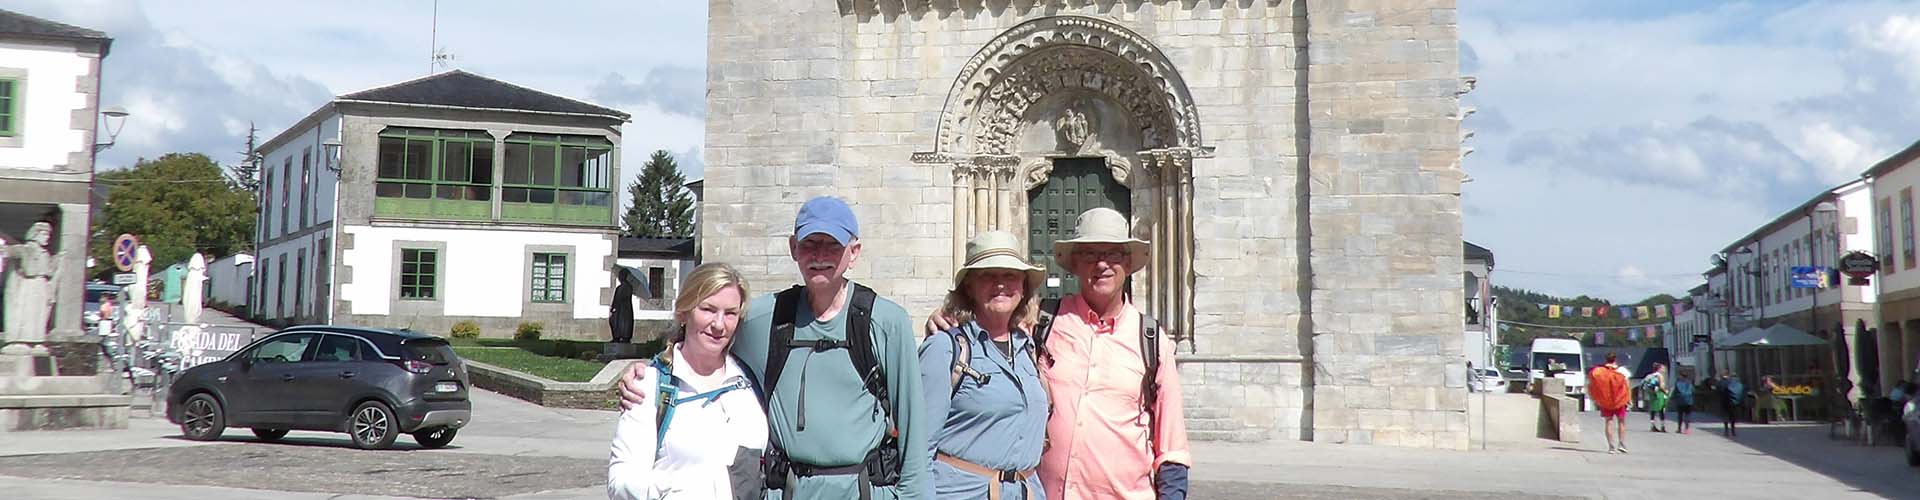 group standing in front of a church